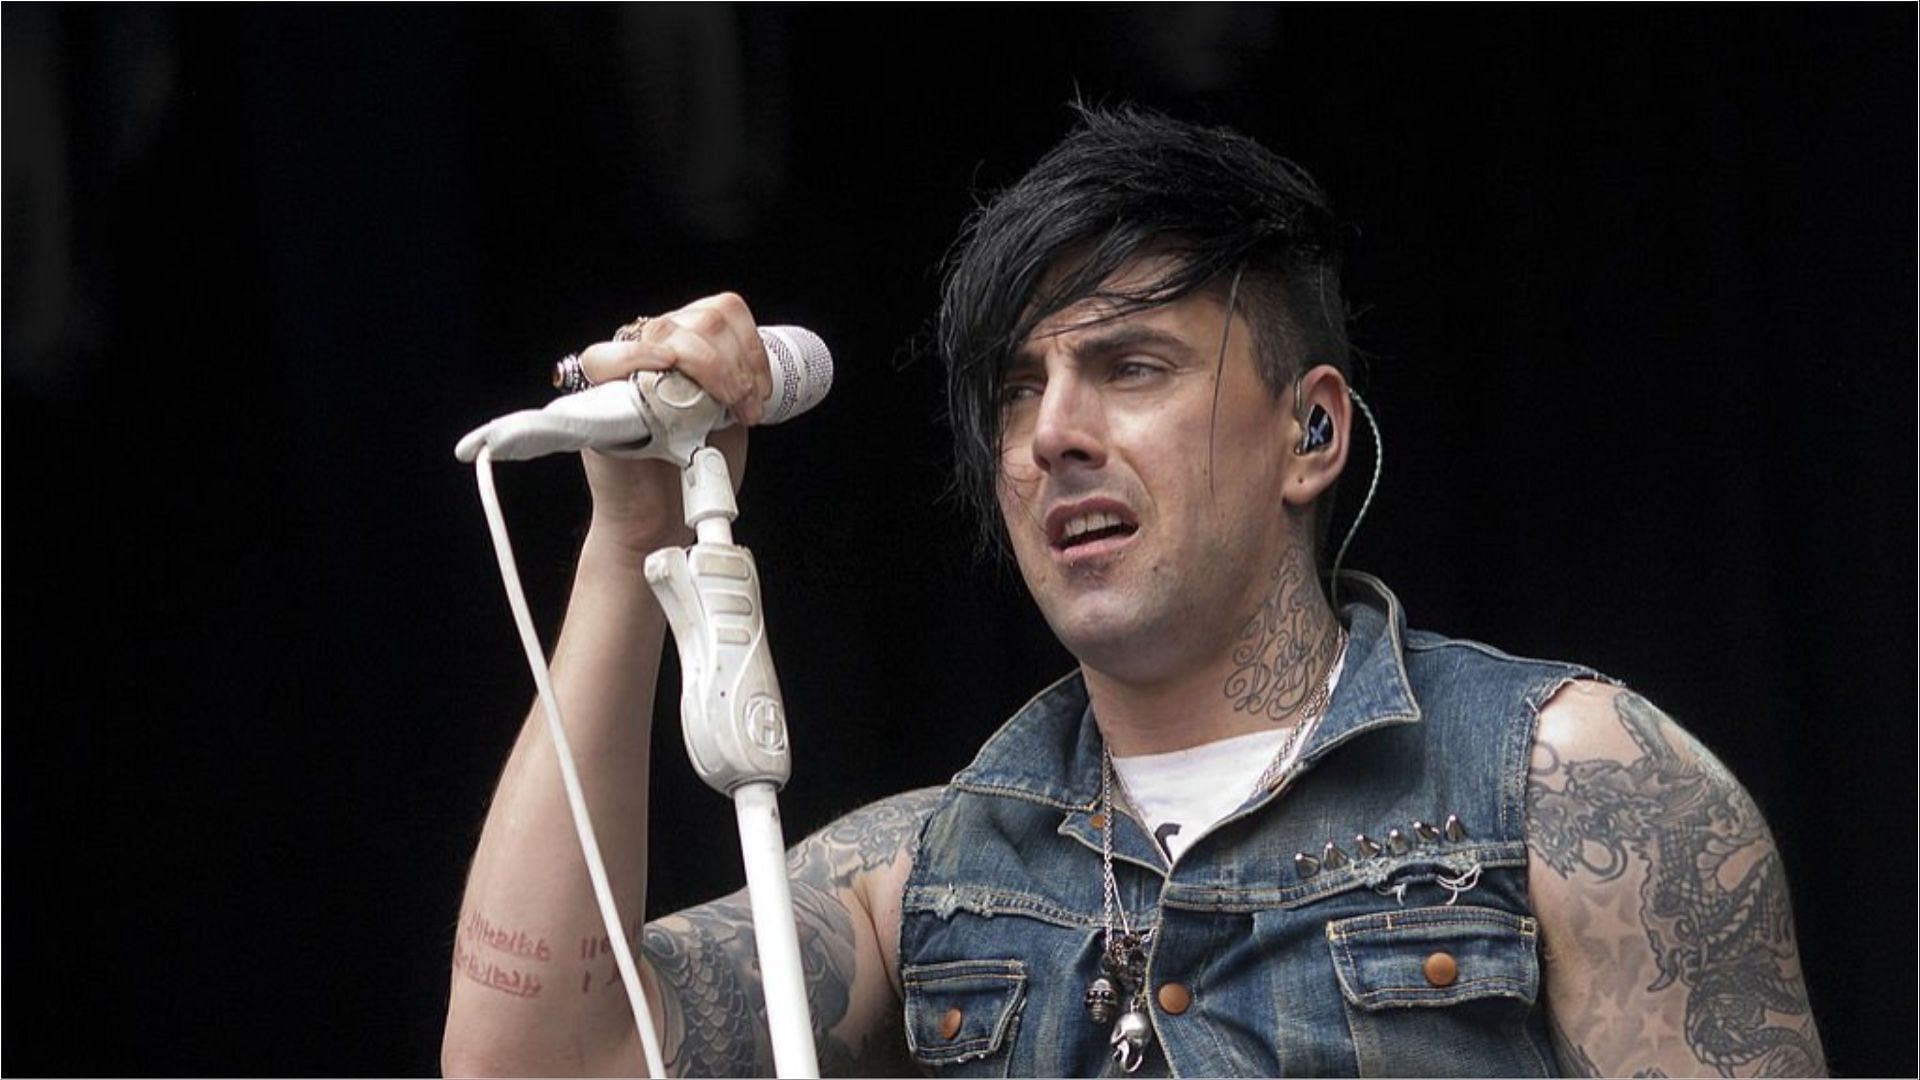 Severe charges related to child s*x abuse and drugs were imposed on Ian Watkins (Image via Marc Grimwade/Getty Images)